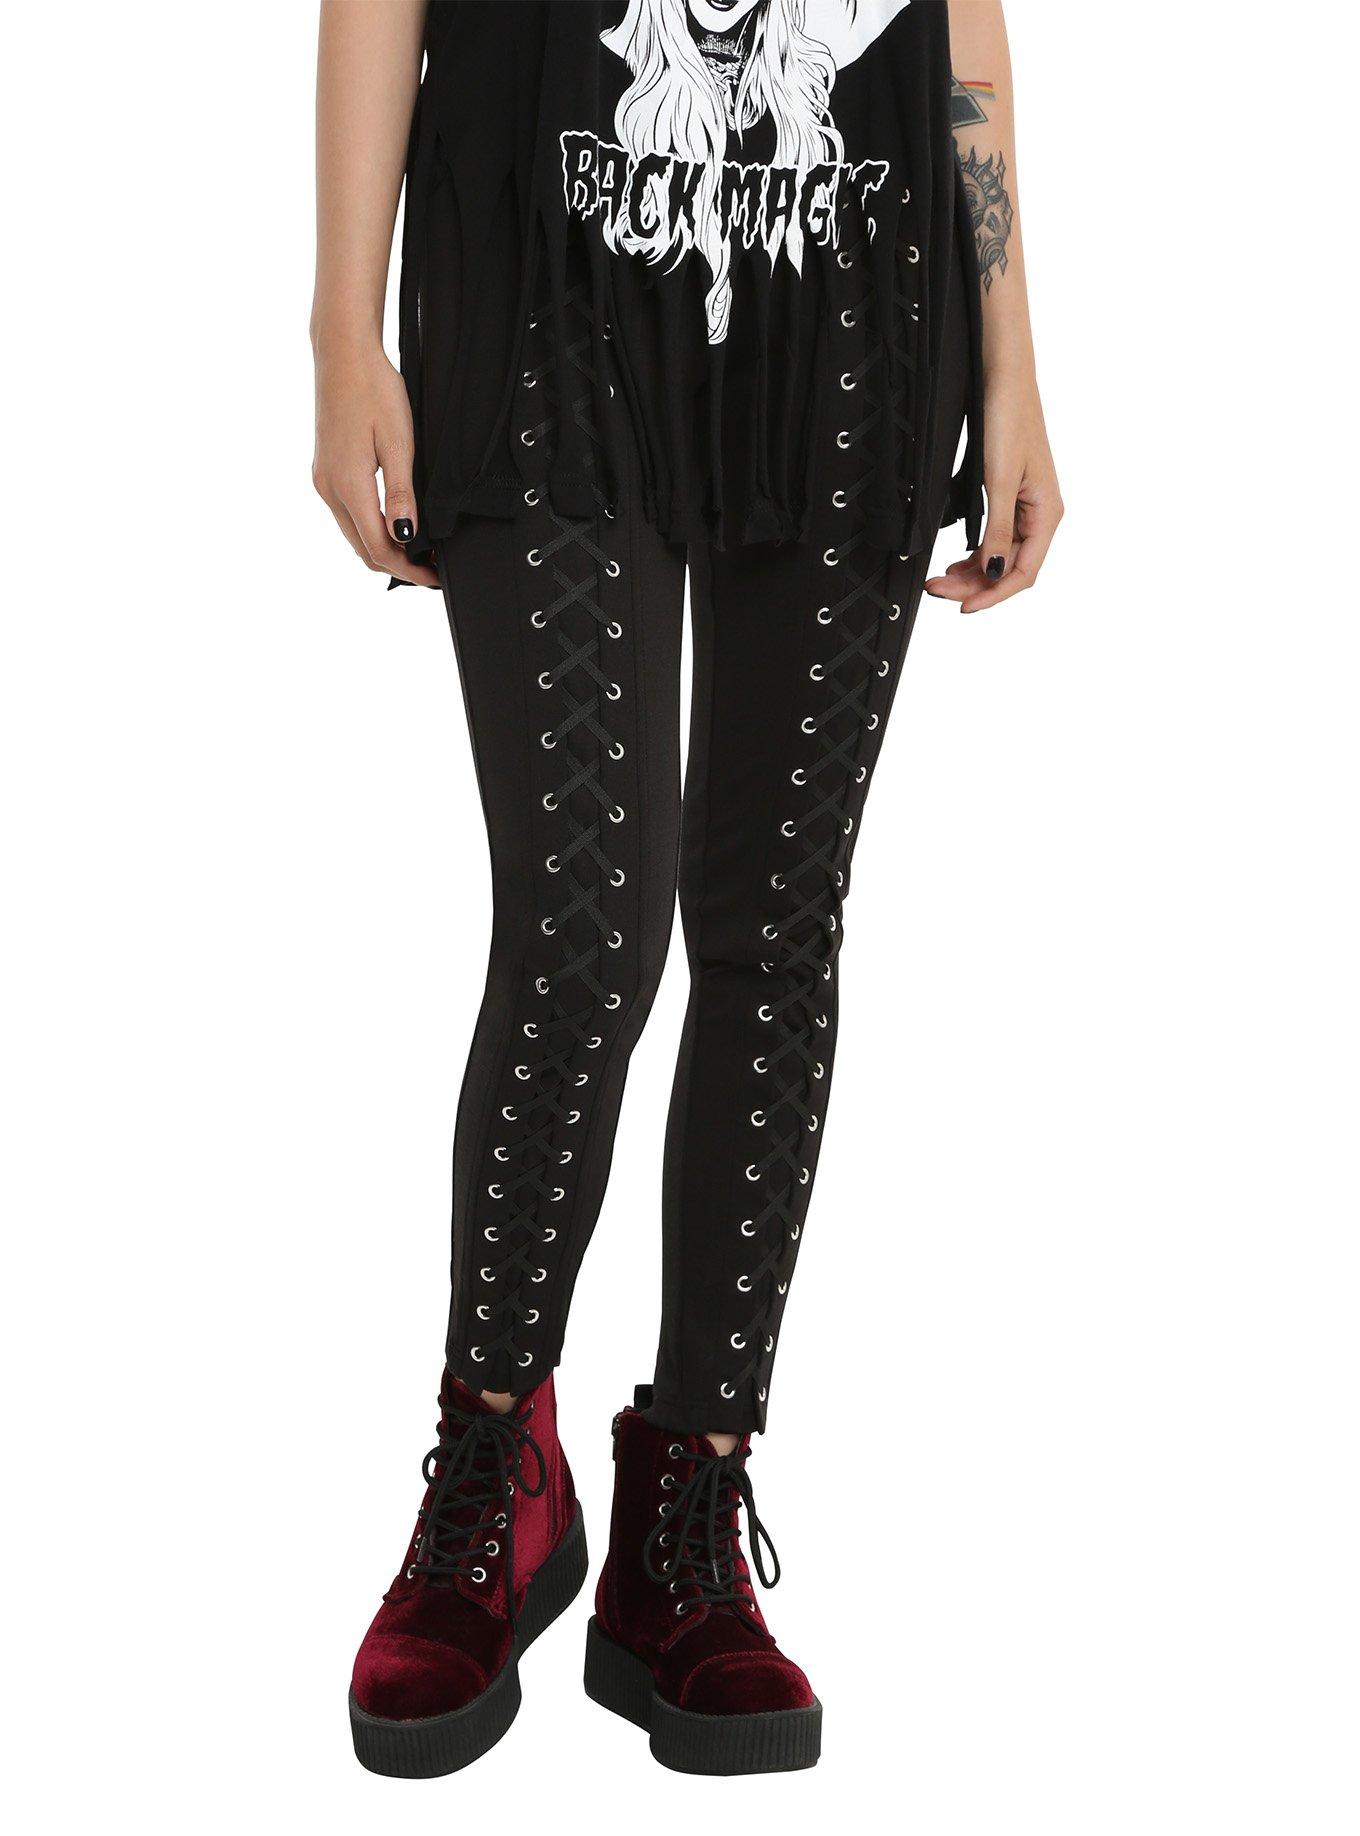 Ci Sono Ponte Leggings with Detail Ankles